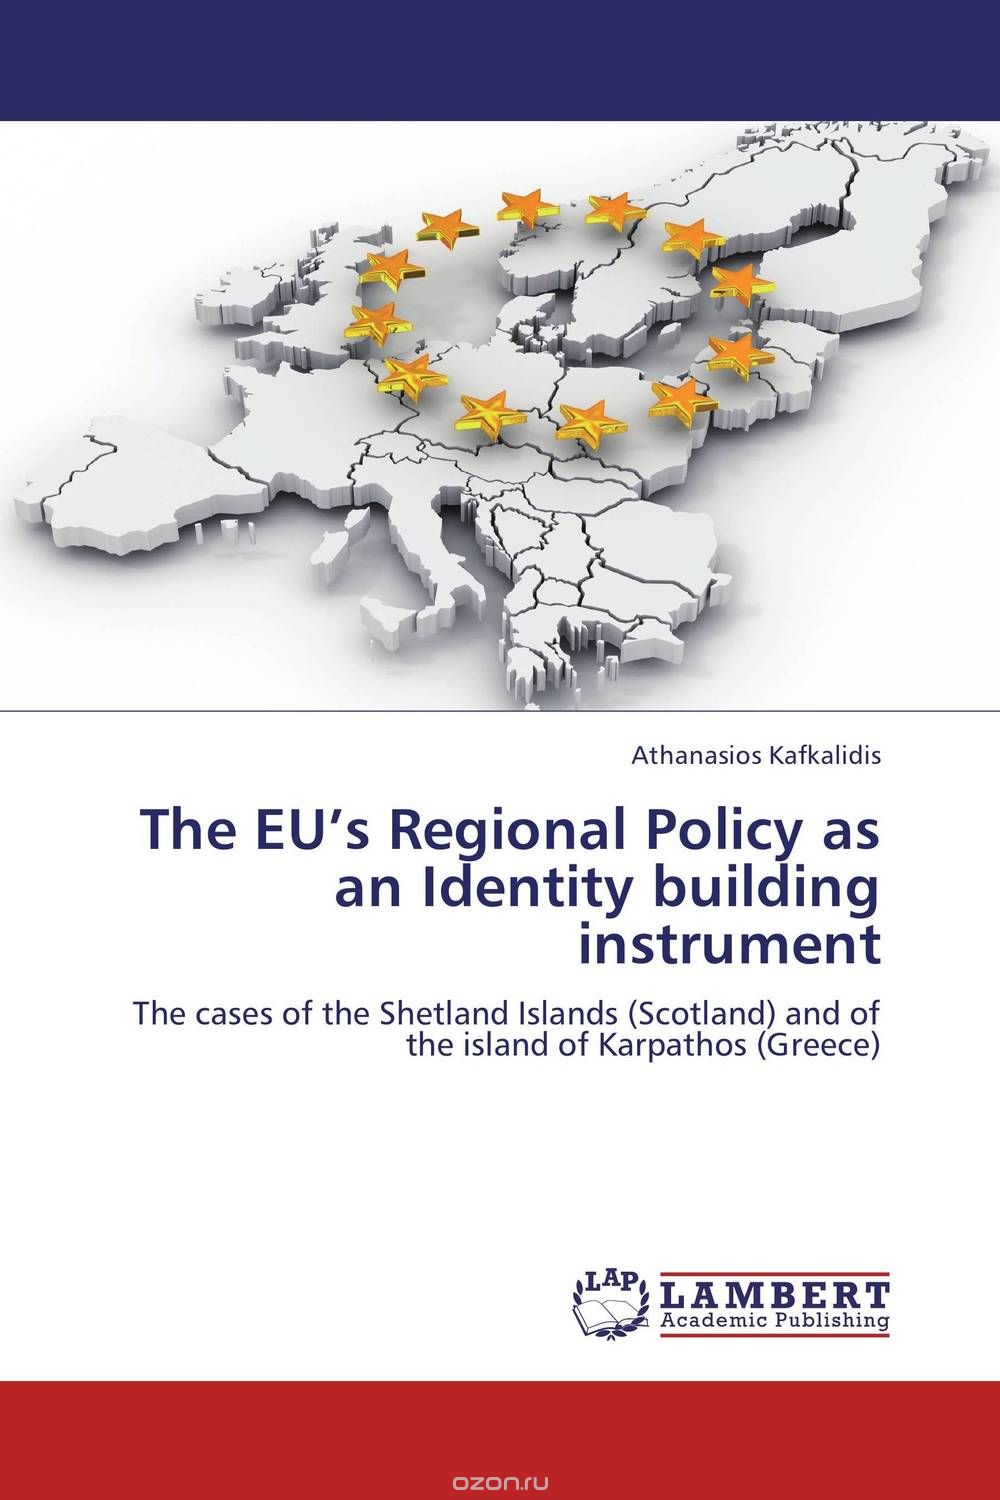 The EU’s Regional Policy as an Identity building instrument